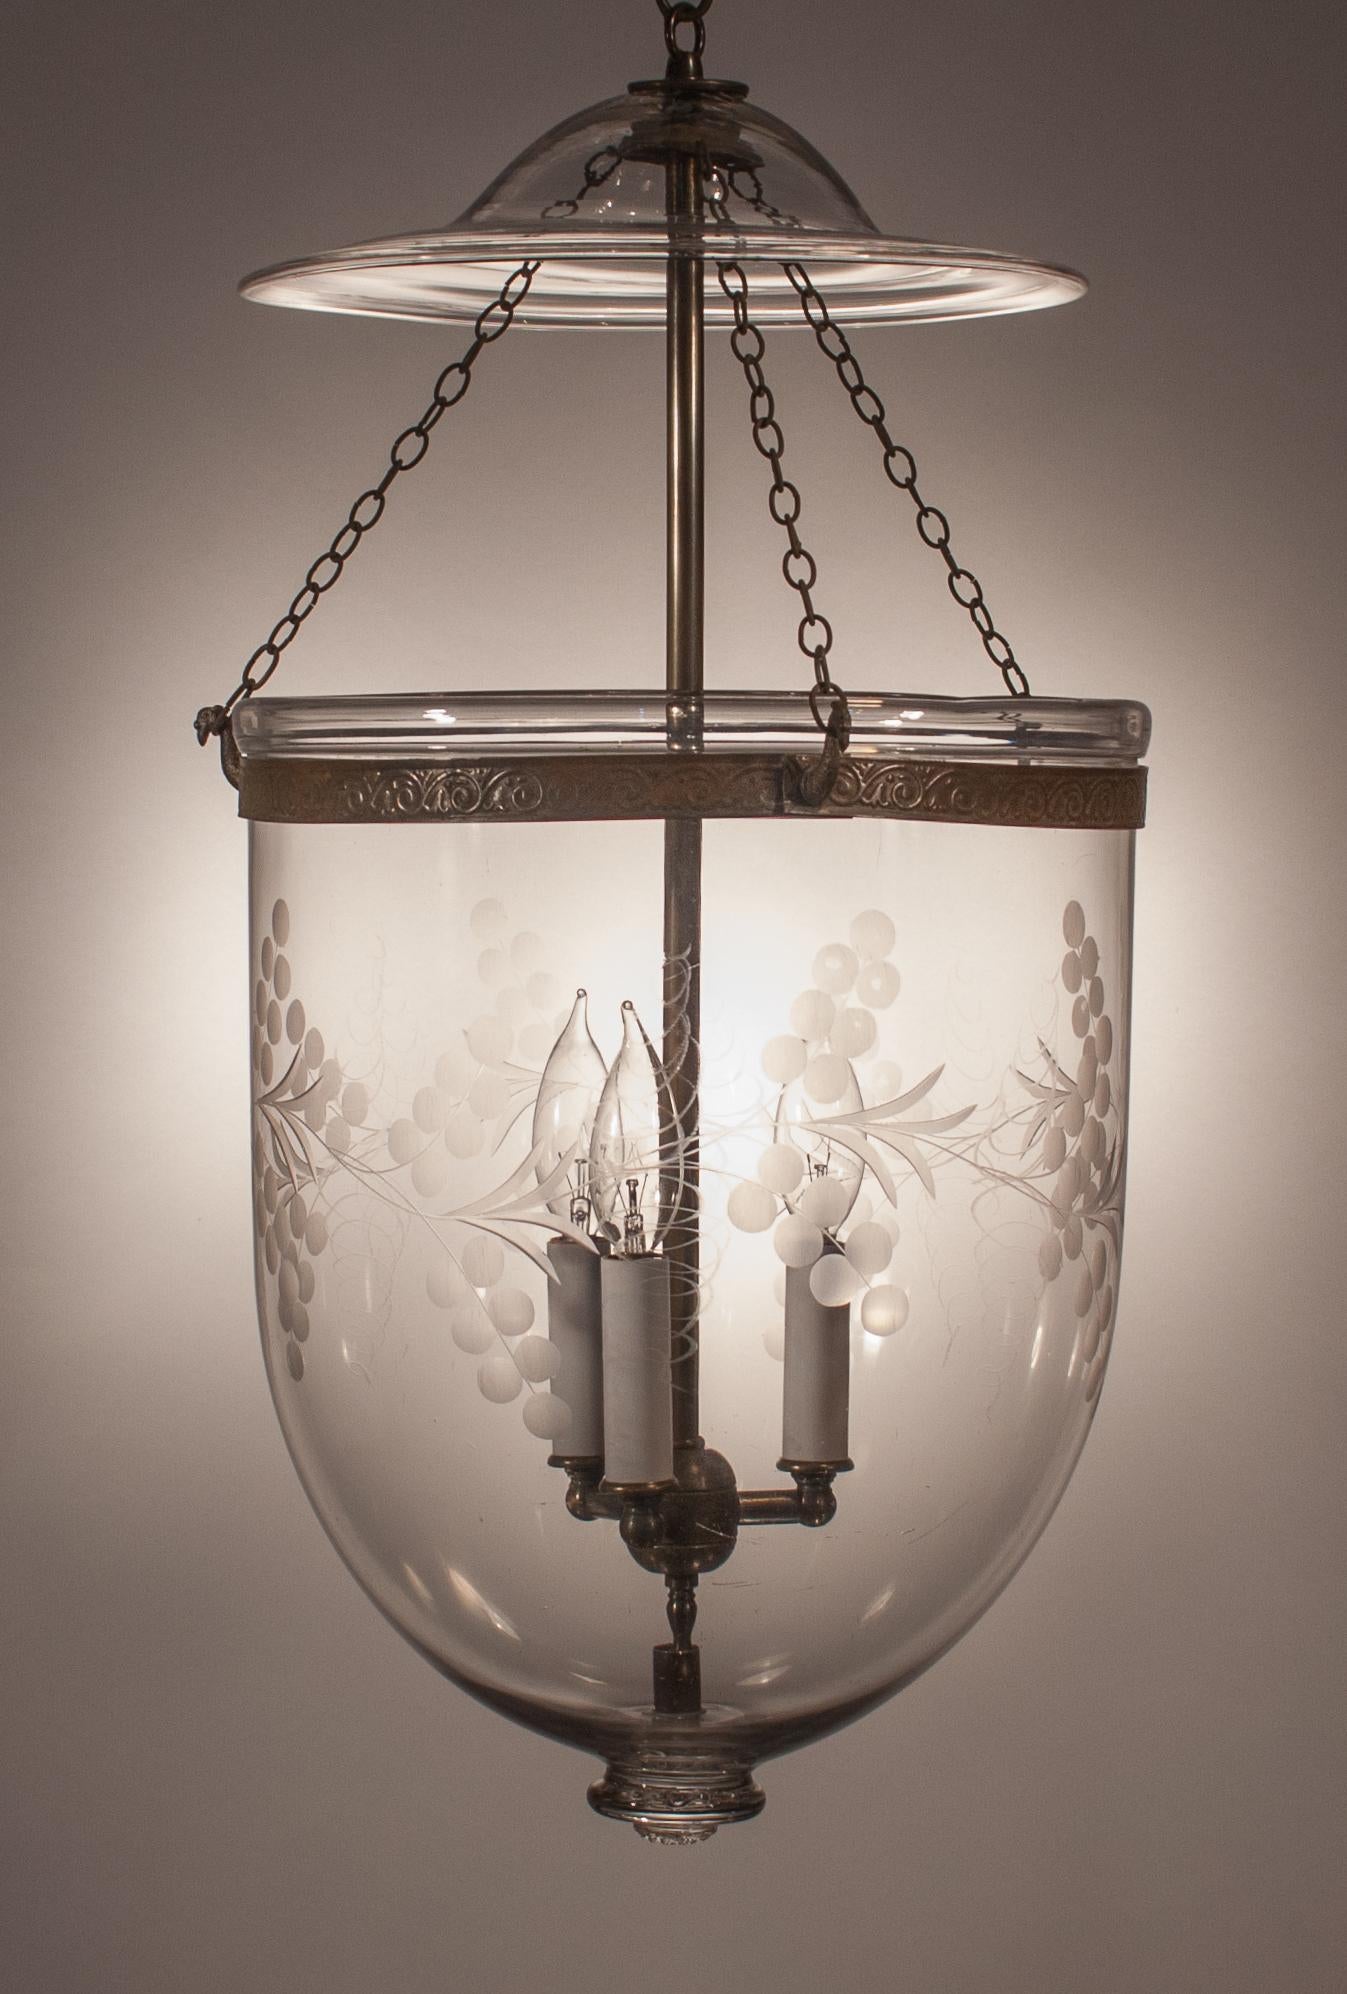 A larger-sized, circa 1870 English bell jar lantern with beautiful form that is complemented with an etched vine motif. The lantern has its original smoke bell/lid. The embossed brass band, which has a wave pattern, was replaced to safeguard against